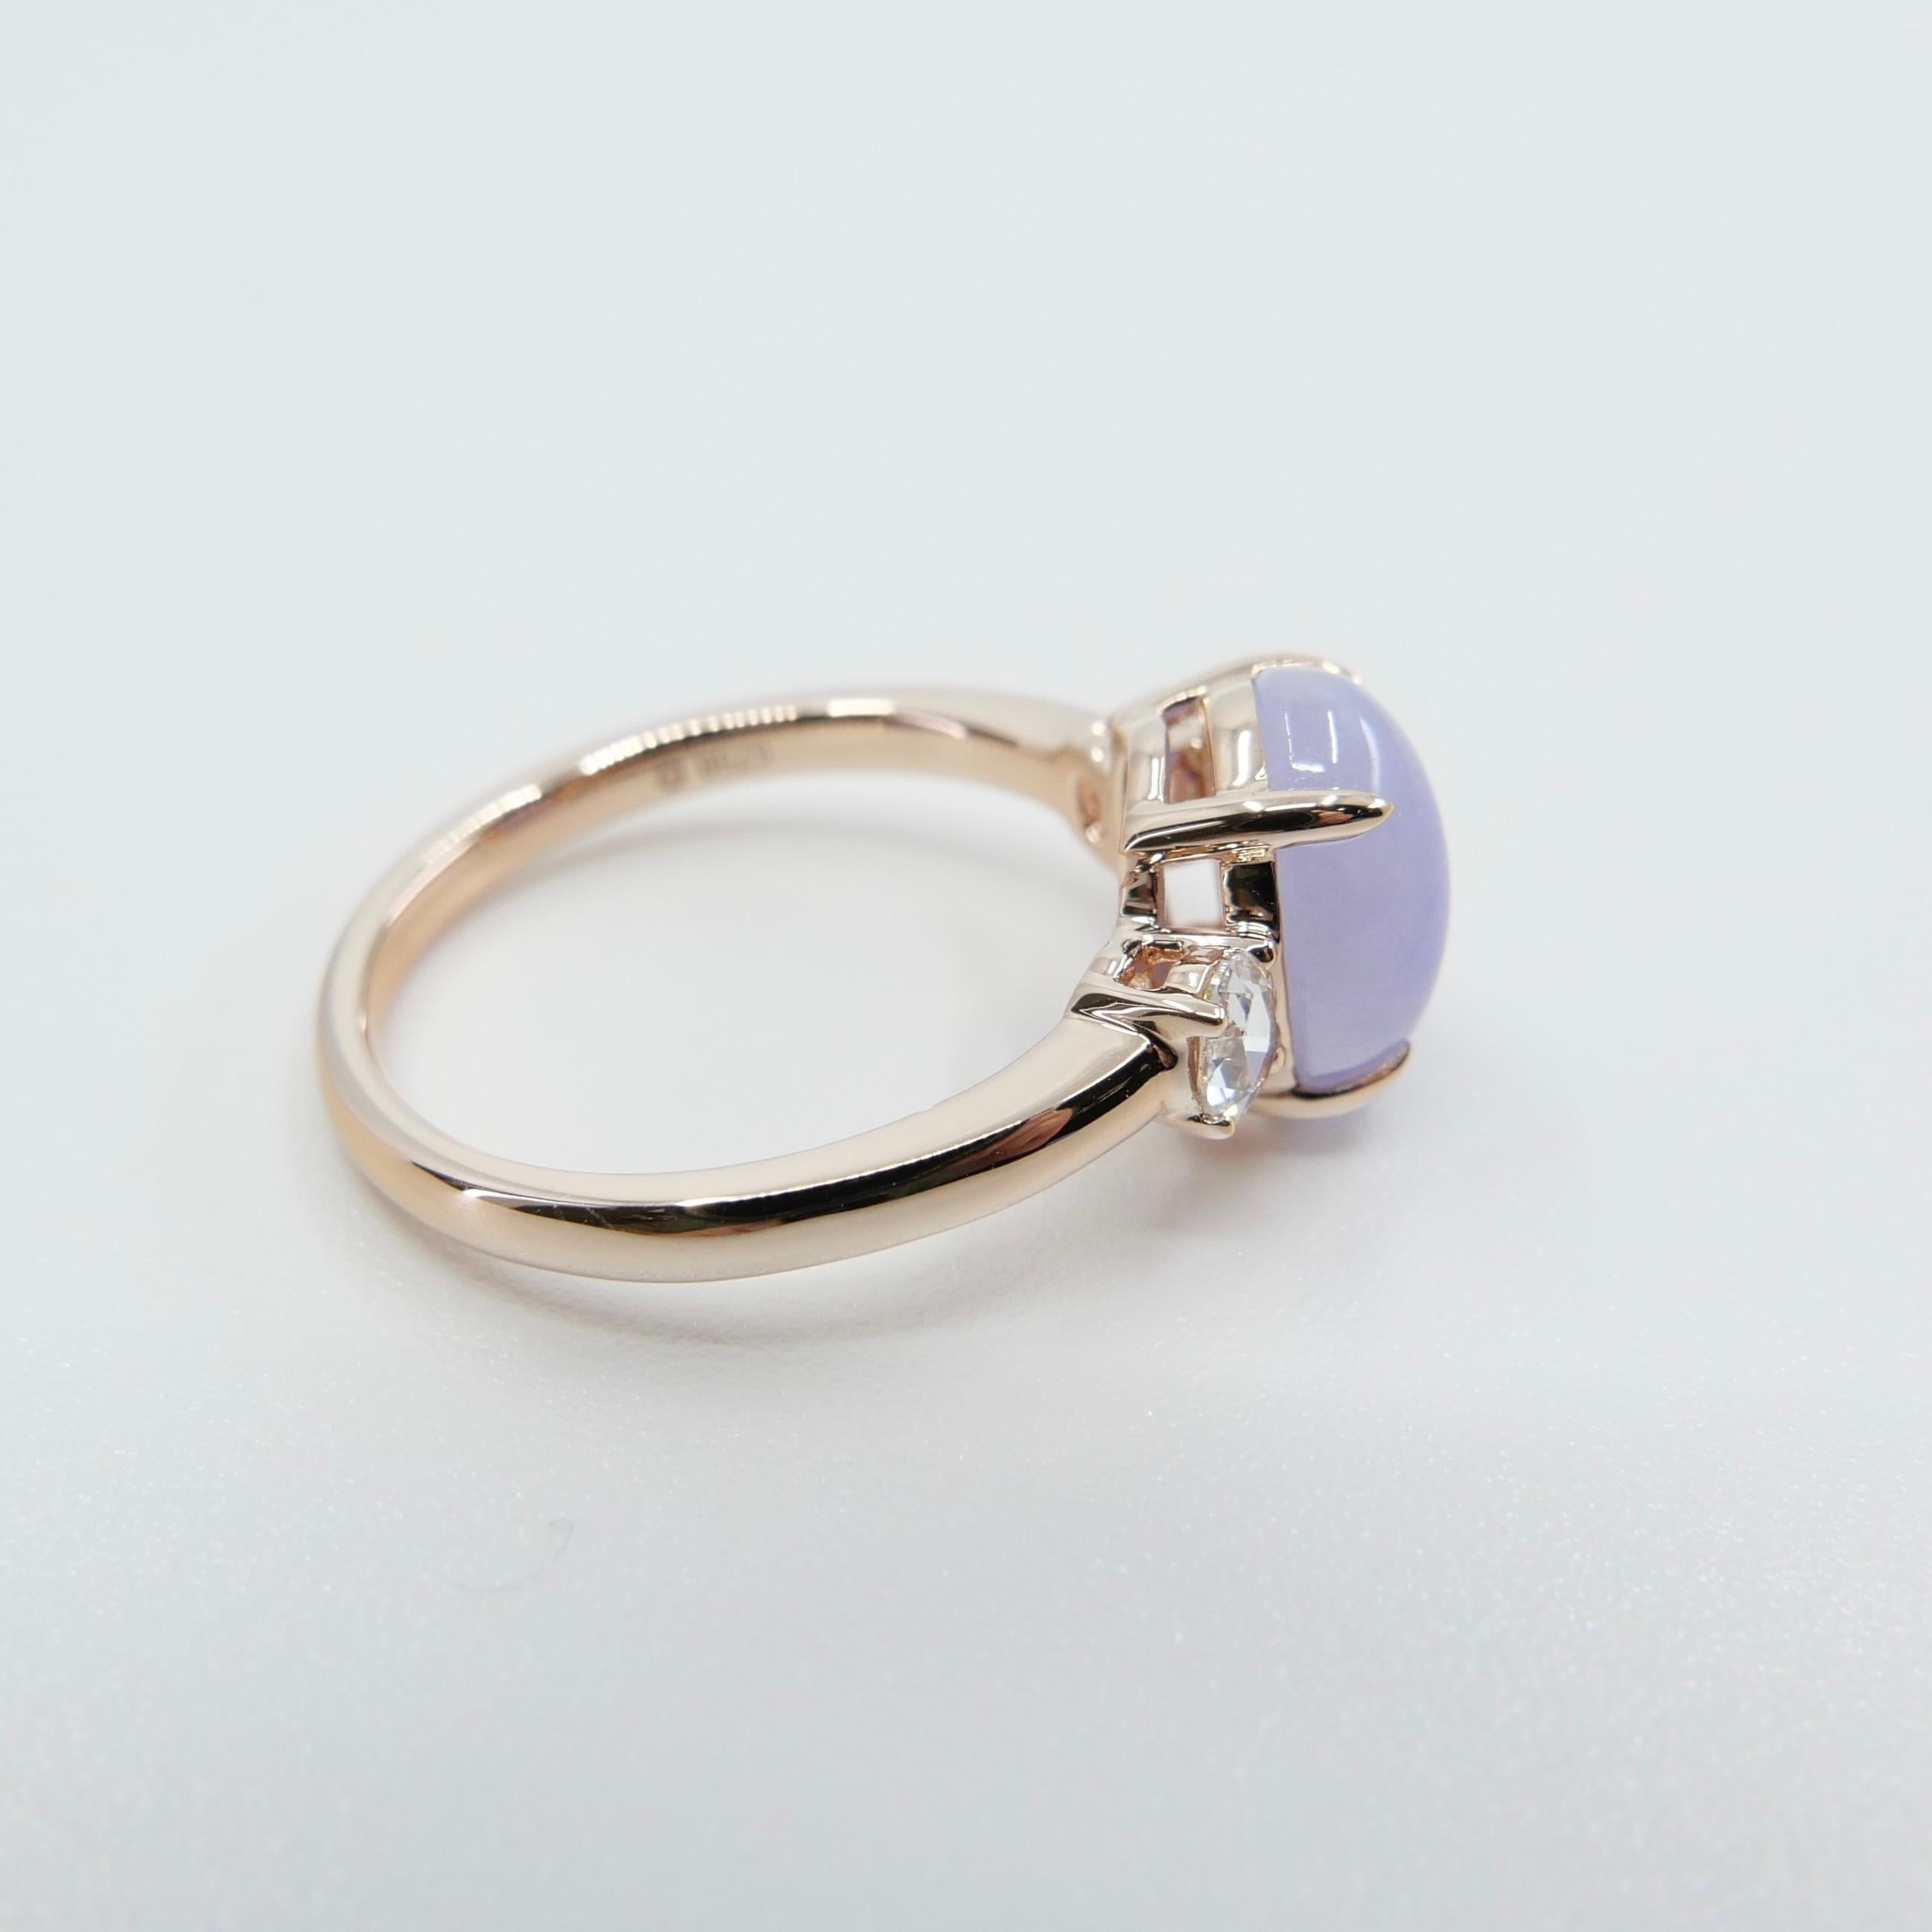 Certified 3.48cts Lavender Jade & Rose Cut Diamond 3 Stone Ring, 18k Rose Gold For Sale 6